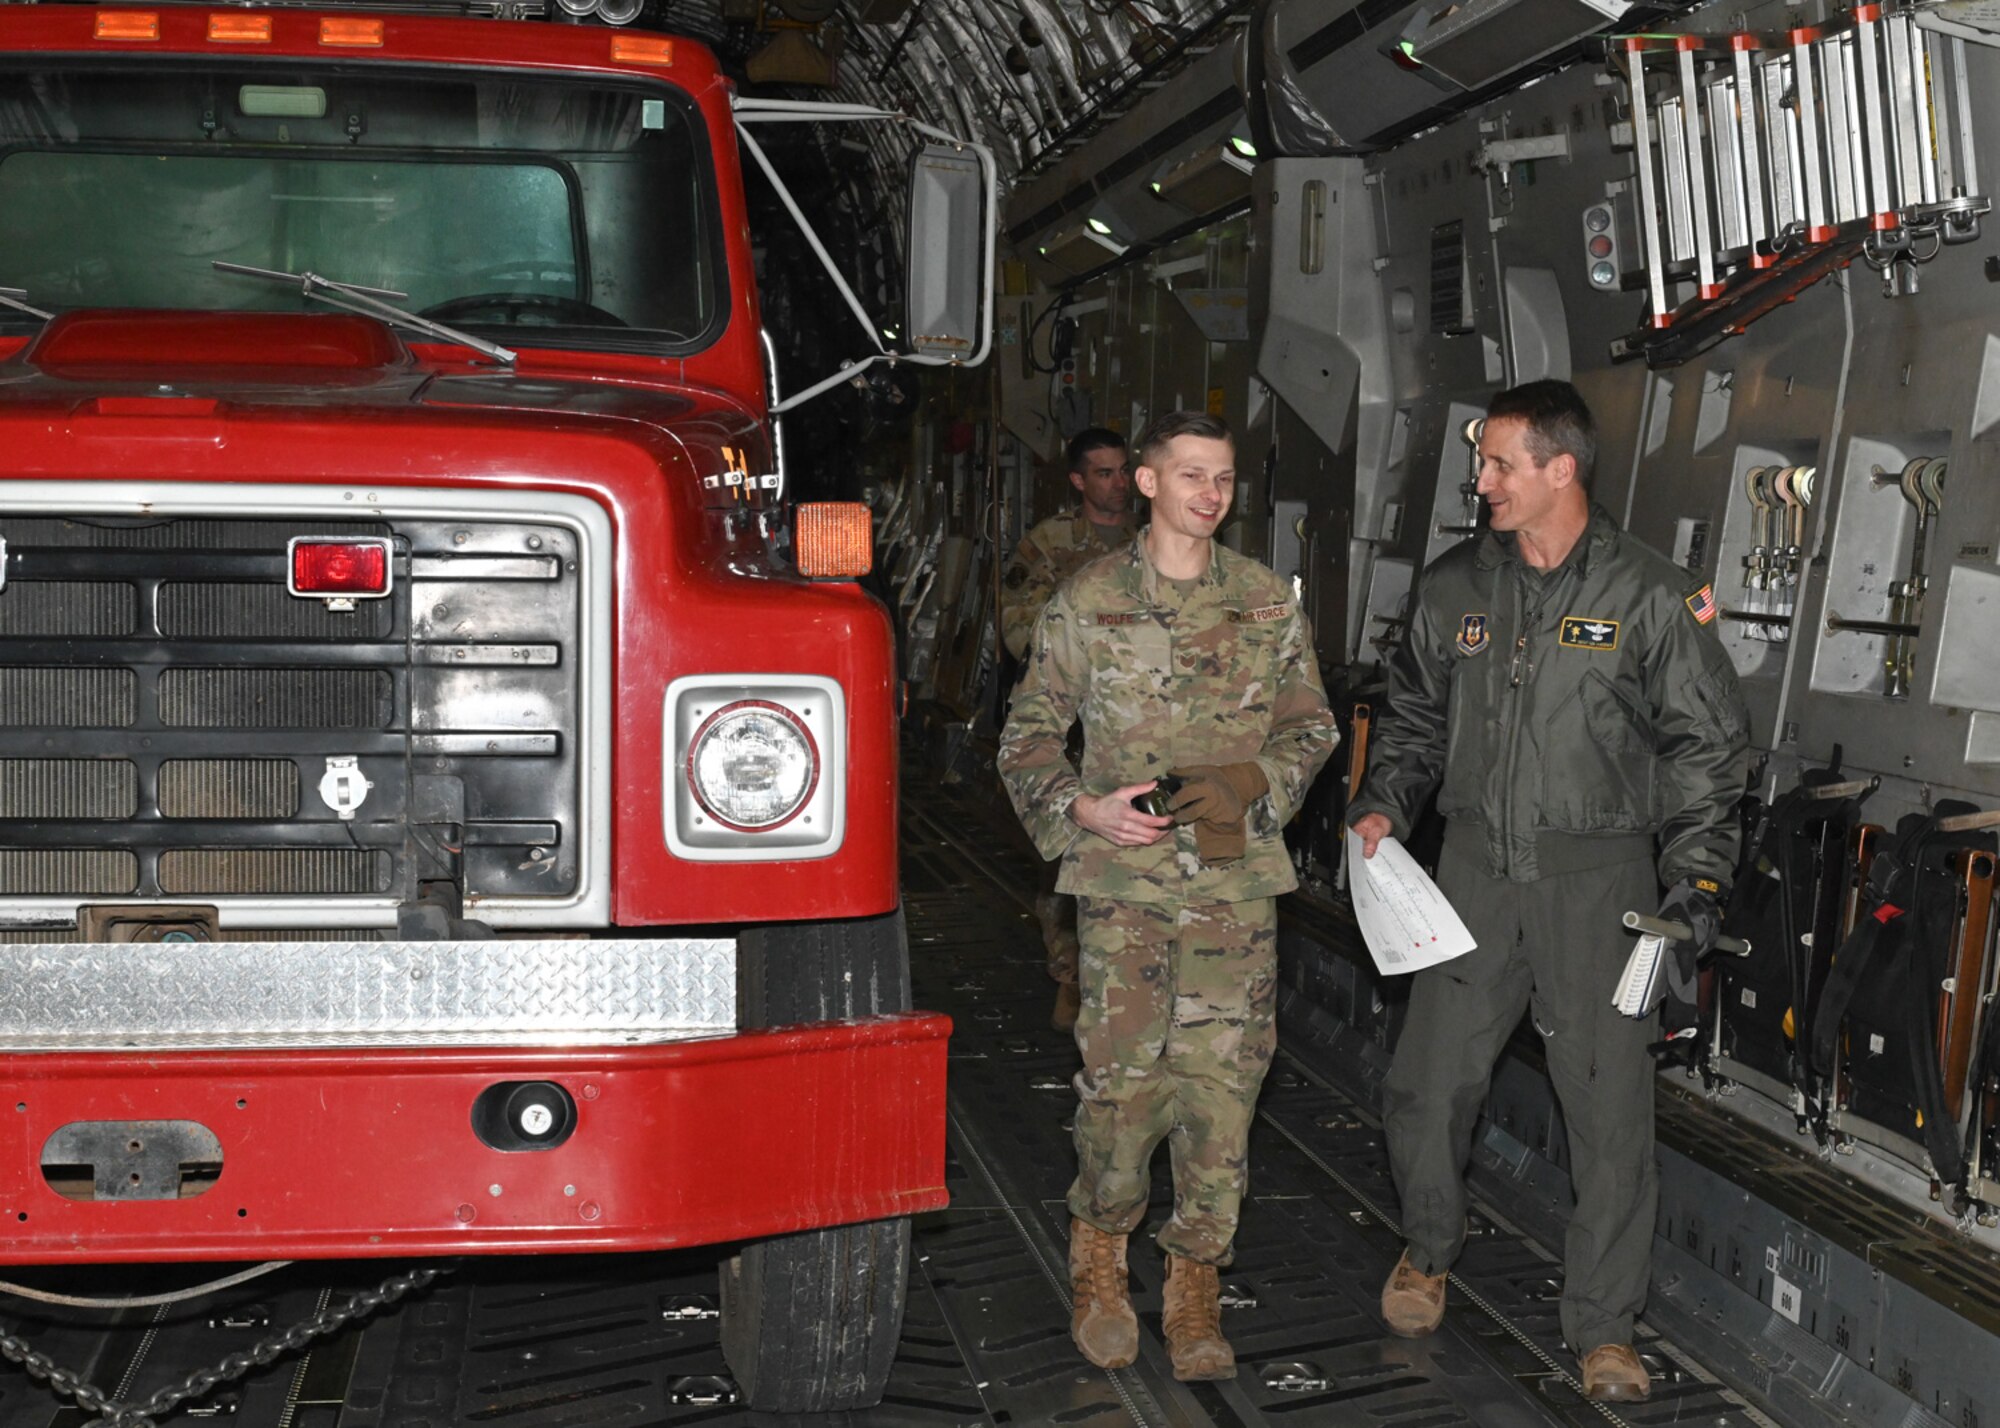 Service members from the 509th Bomb Wing and 437th Airlift Wing attach chains to a firetruck on board a C-17 at Whiteman Air Force Base, Missouri, February 10, 2023. The 437th Airlift Wing occasionally completes missions moving donated cargo through the Denton Program, which enables the DOD to provide logistical support for charitable organizations. (U.S. Air Force photo by Senior Airman Nash Truitt)